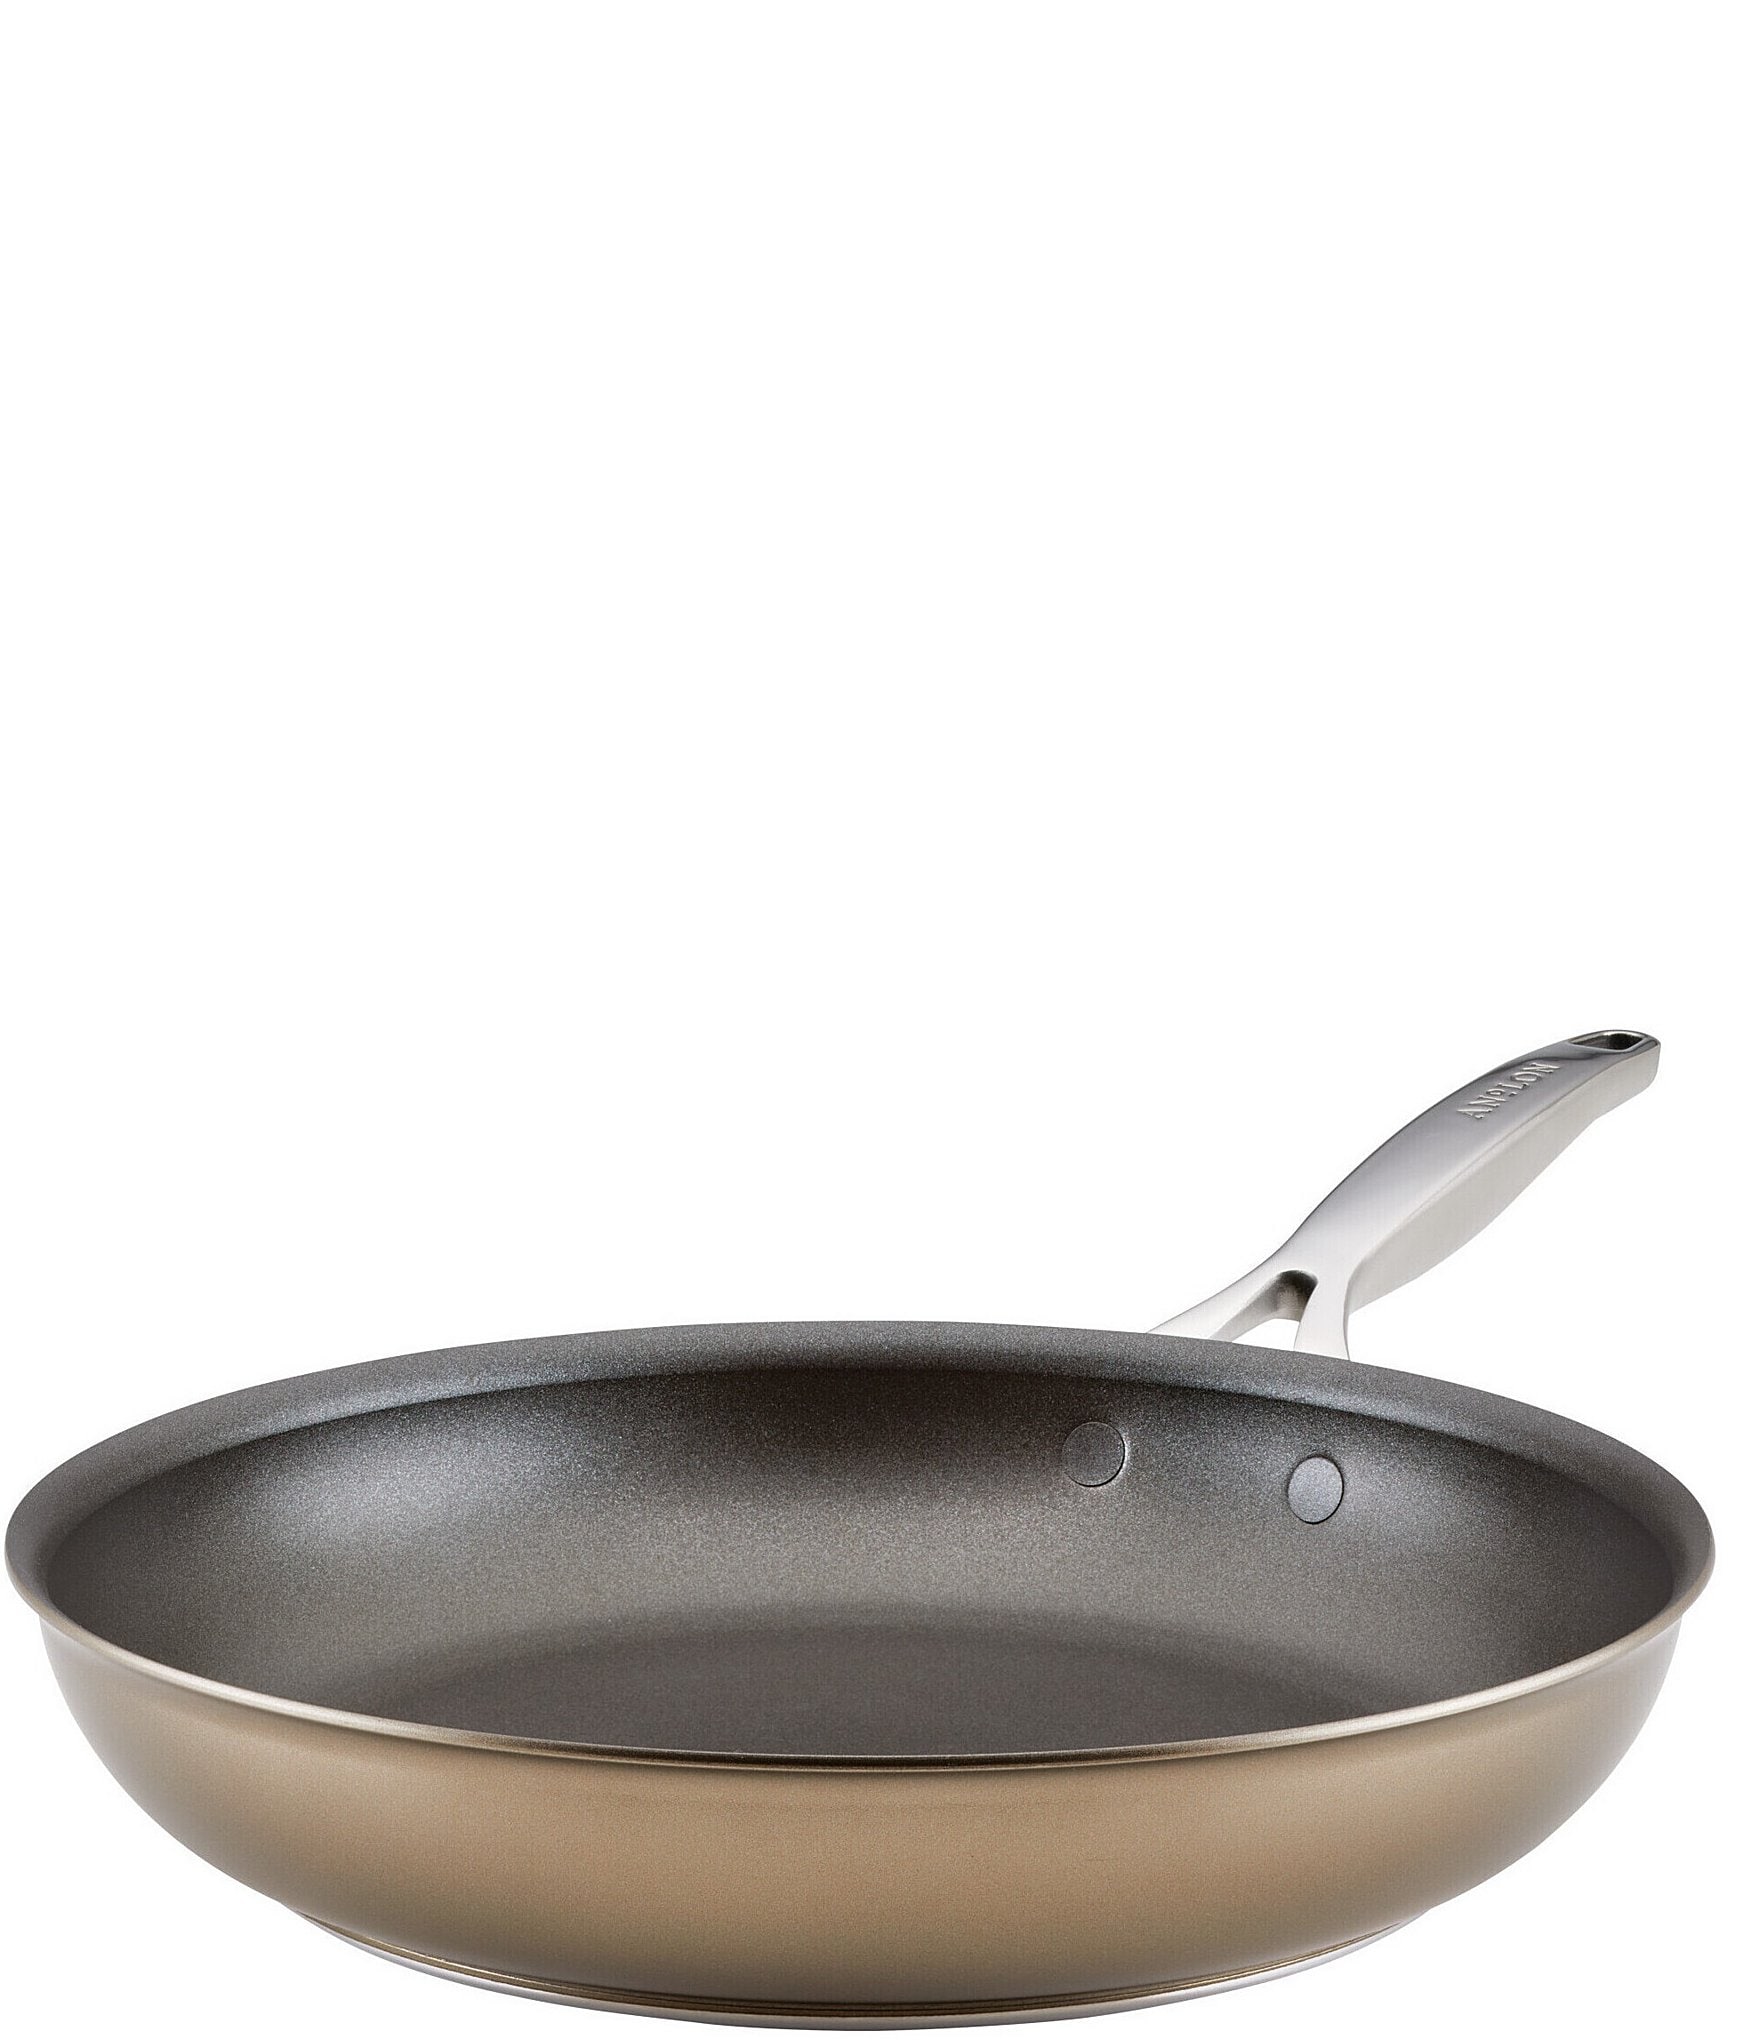 Anolon x Hybrid Nonstick Induction Frying Pan 8.25-Inch